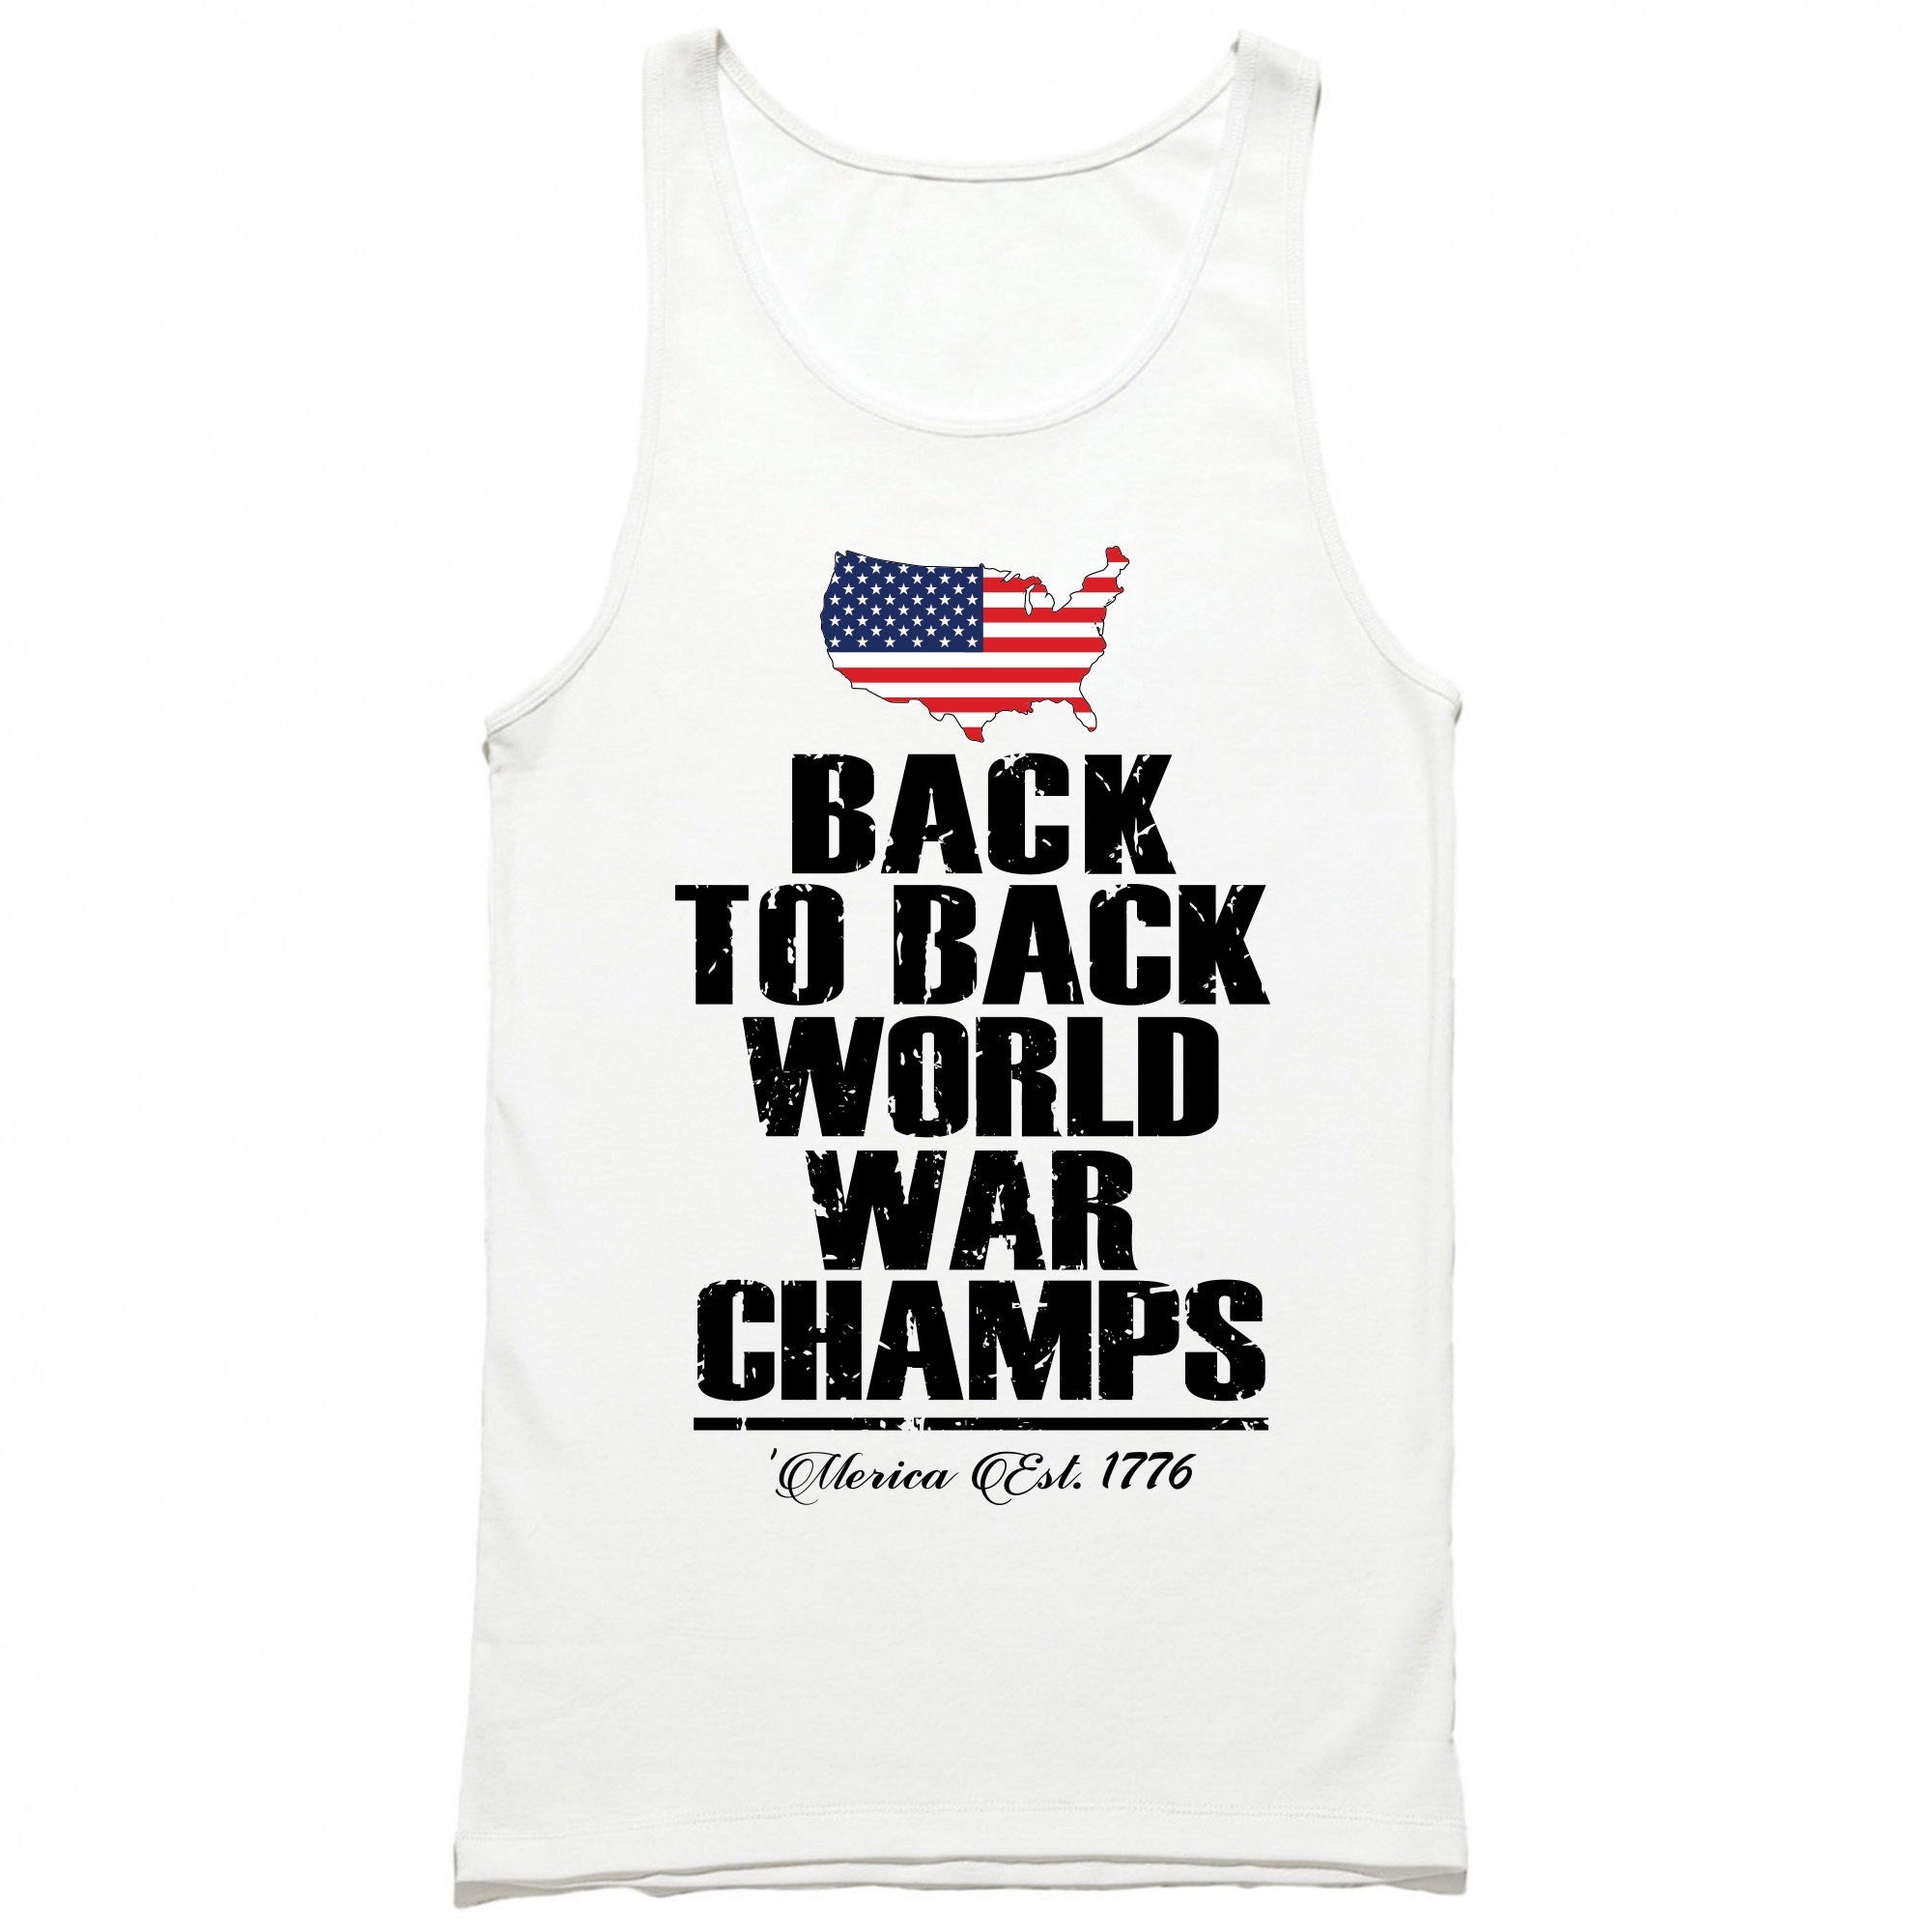 back to back world war champs tank top